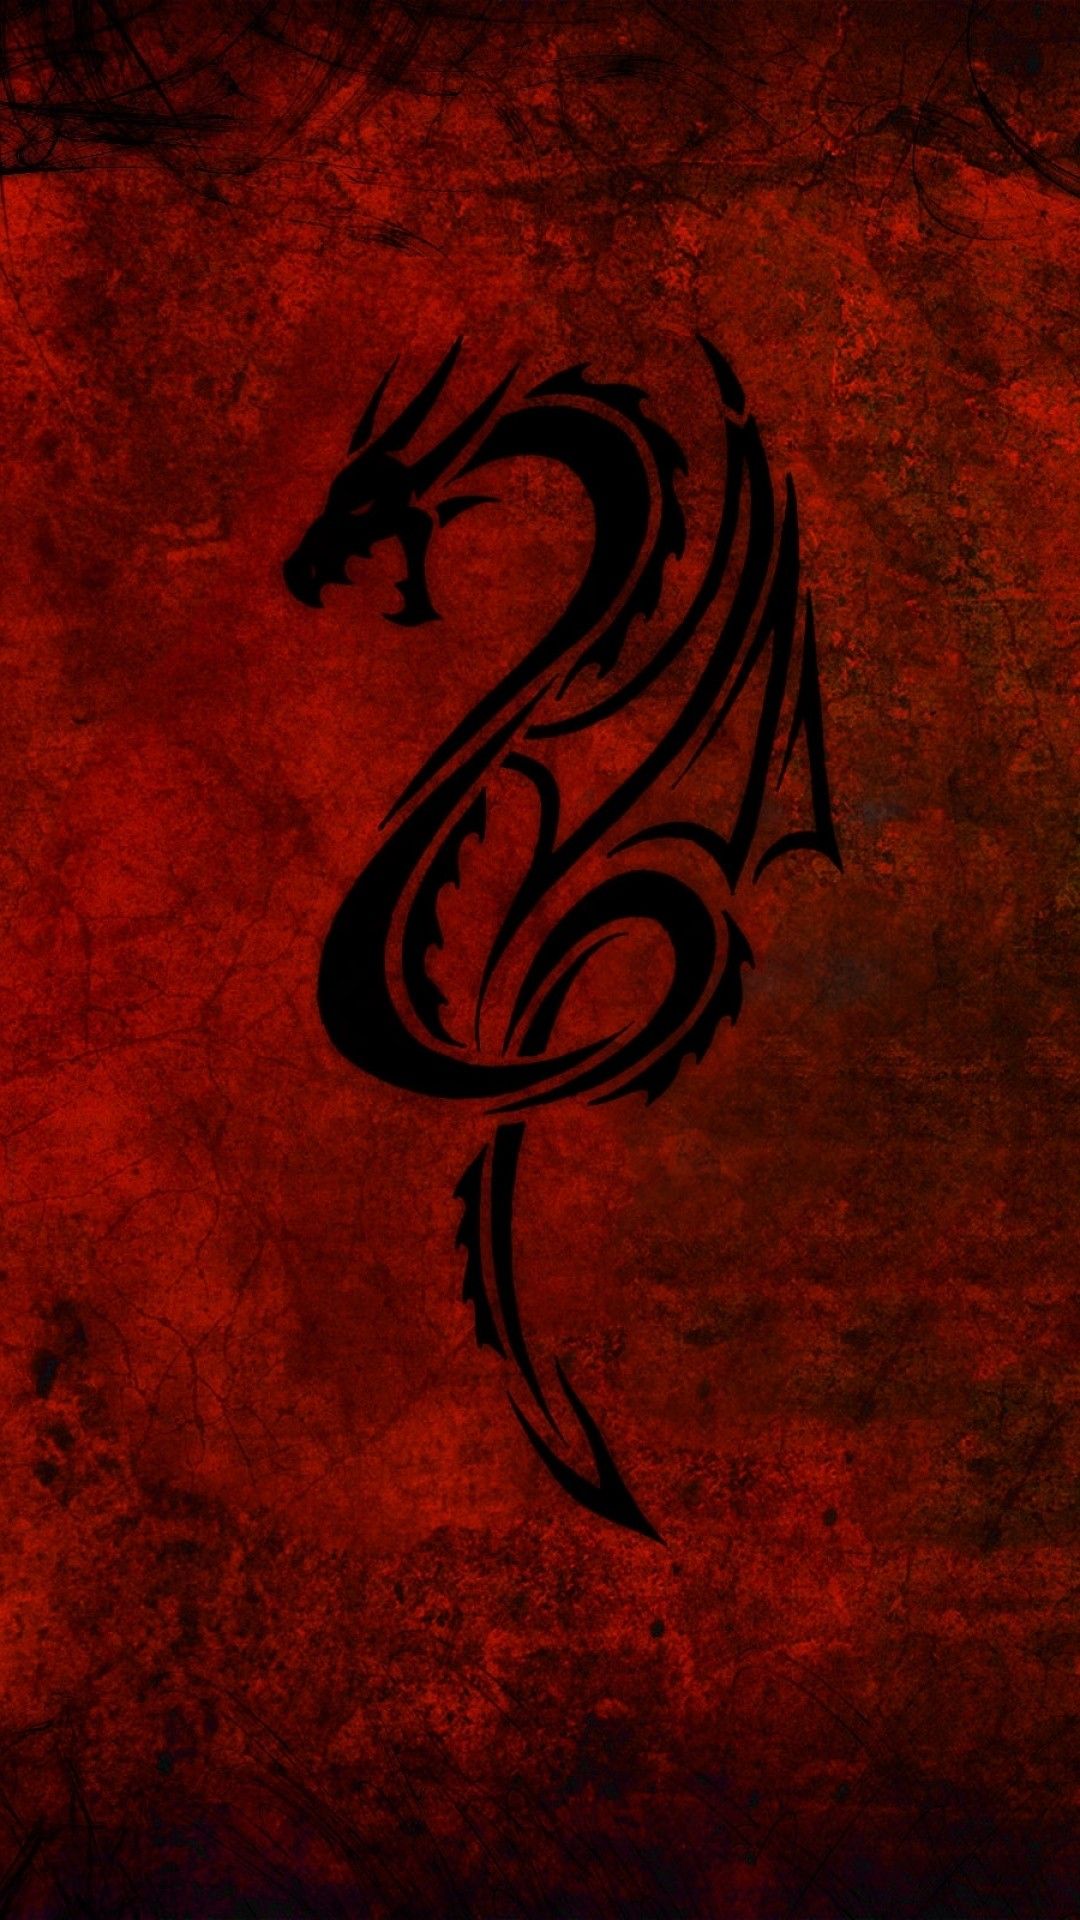 ✓[125+] Red Dragon Wallpaper HD - Android, iPhone, Desktop HD Backgrounds /  Wallpapers (1080p, 4k) (png / jpg) (2023)